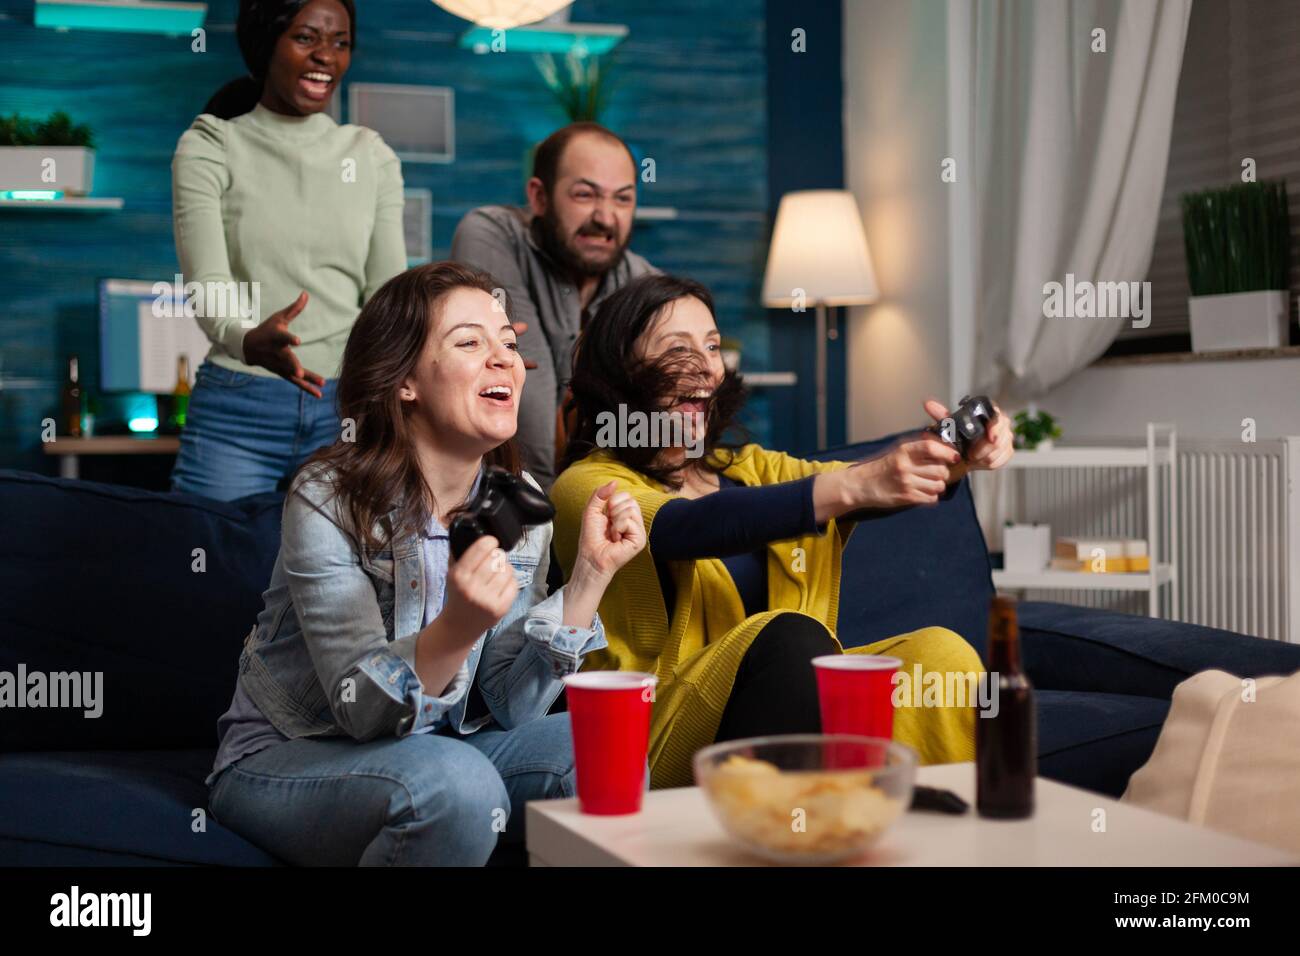 Multi ethnic group of people socializing winning at video games having fun. Group of mixed race friends playing games while sitting on sofa in living room late at night. Stock Photo